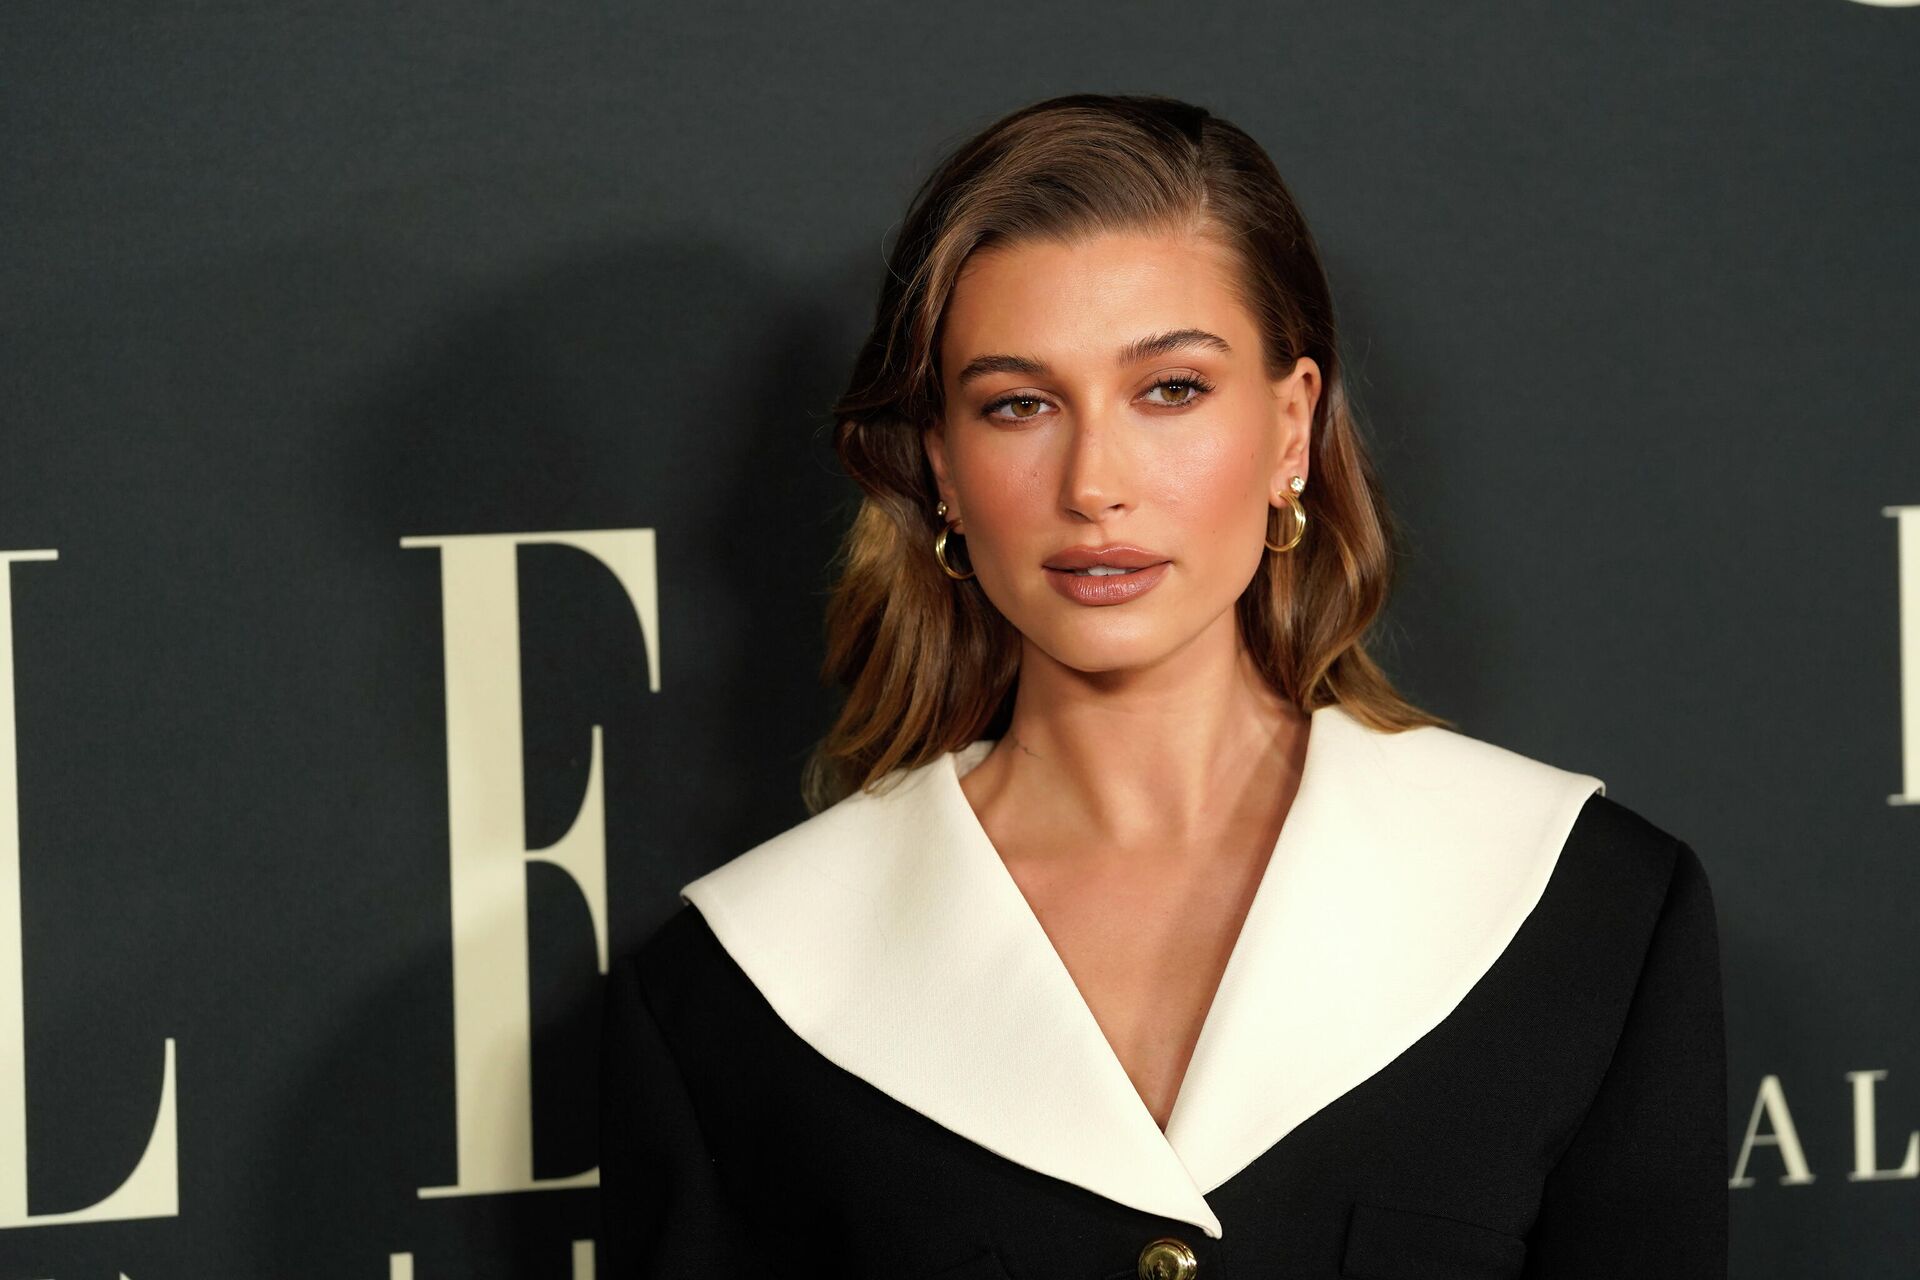 FILE - Hailey Bieber arrives at the 27th annual ELLE Women in Hollywood celebration on Tuesday, Oct. 19, 2021, at the Academy Museum of Motion Pictures in Los Angeles. The model says on Saturday, March 12, 2022, that she's fine after a health scare, suffering a small blood clot to her brain. Bieber, wife of pop star Justin Bieber, posted on Instagram Saturday that she was having breakfast with her husband on Thursday when she began feeling stroke-like symptoms. - Sputnik International, 1920, 08.10.2022